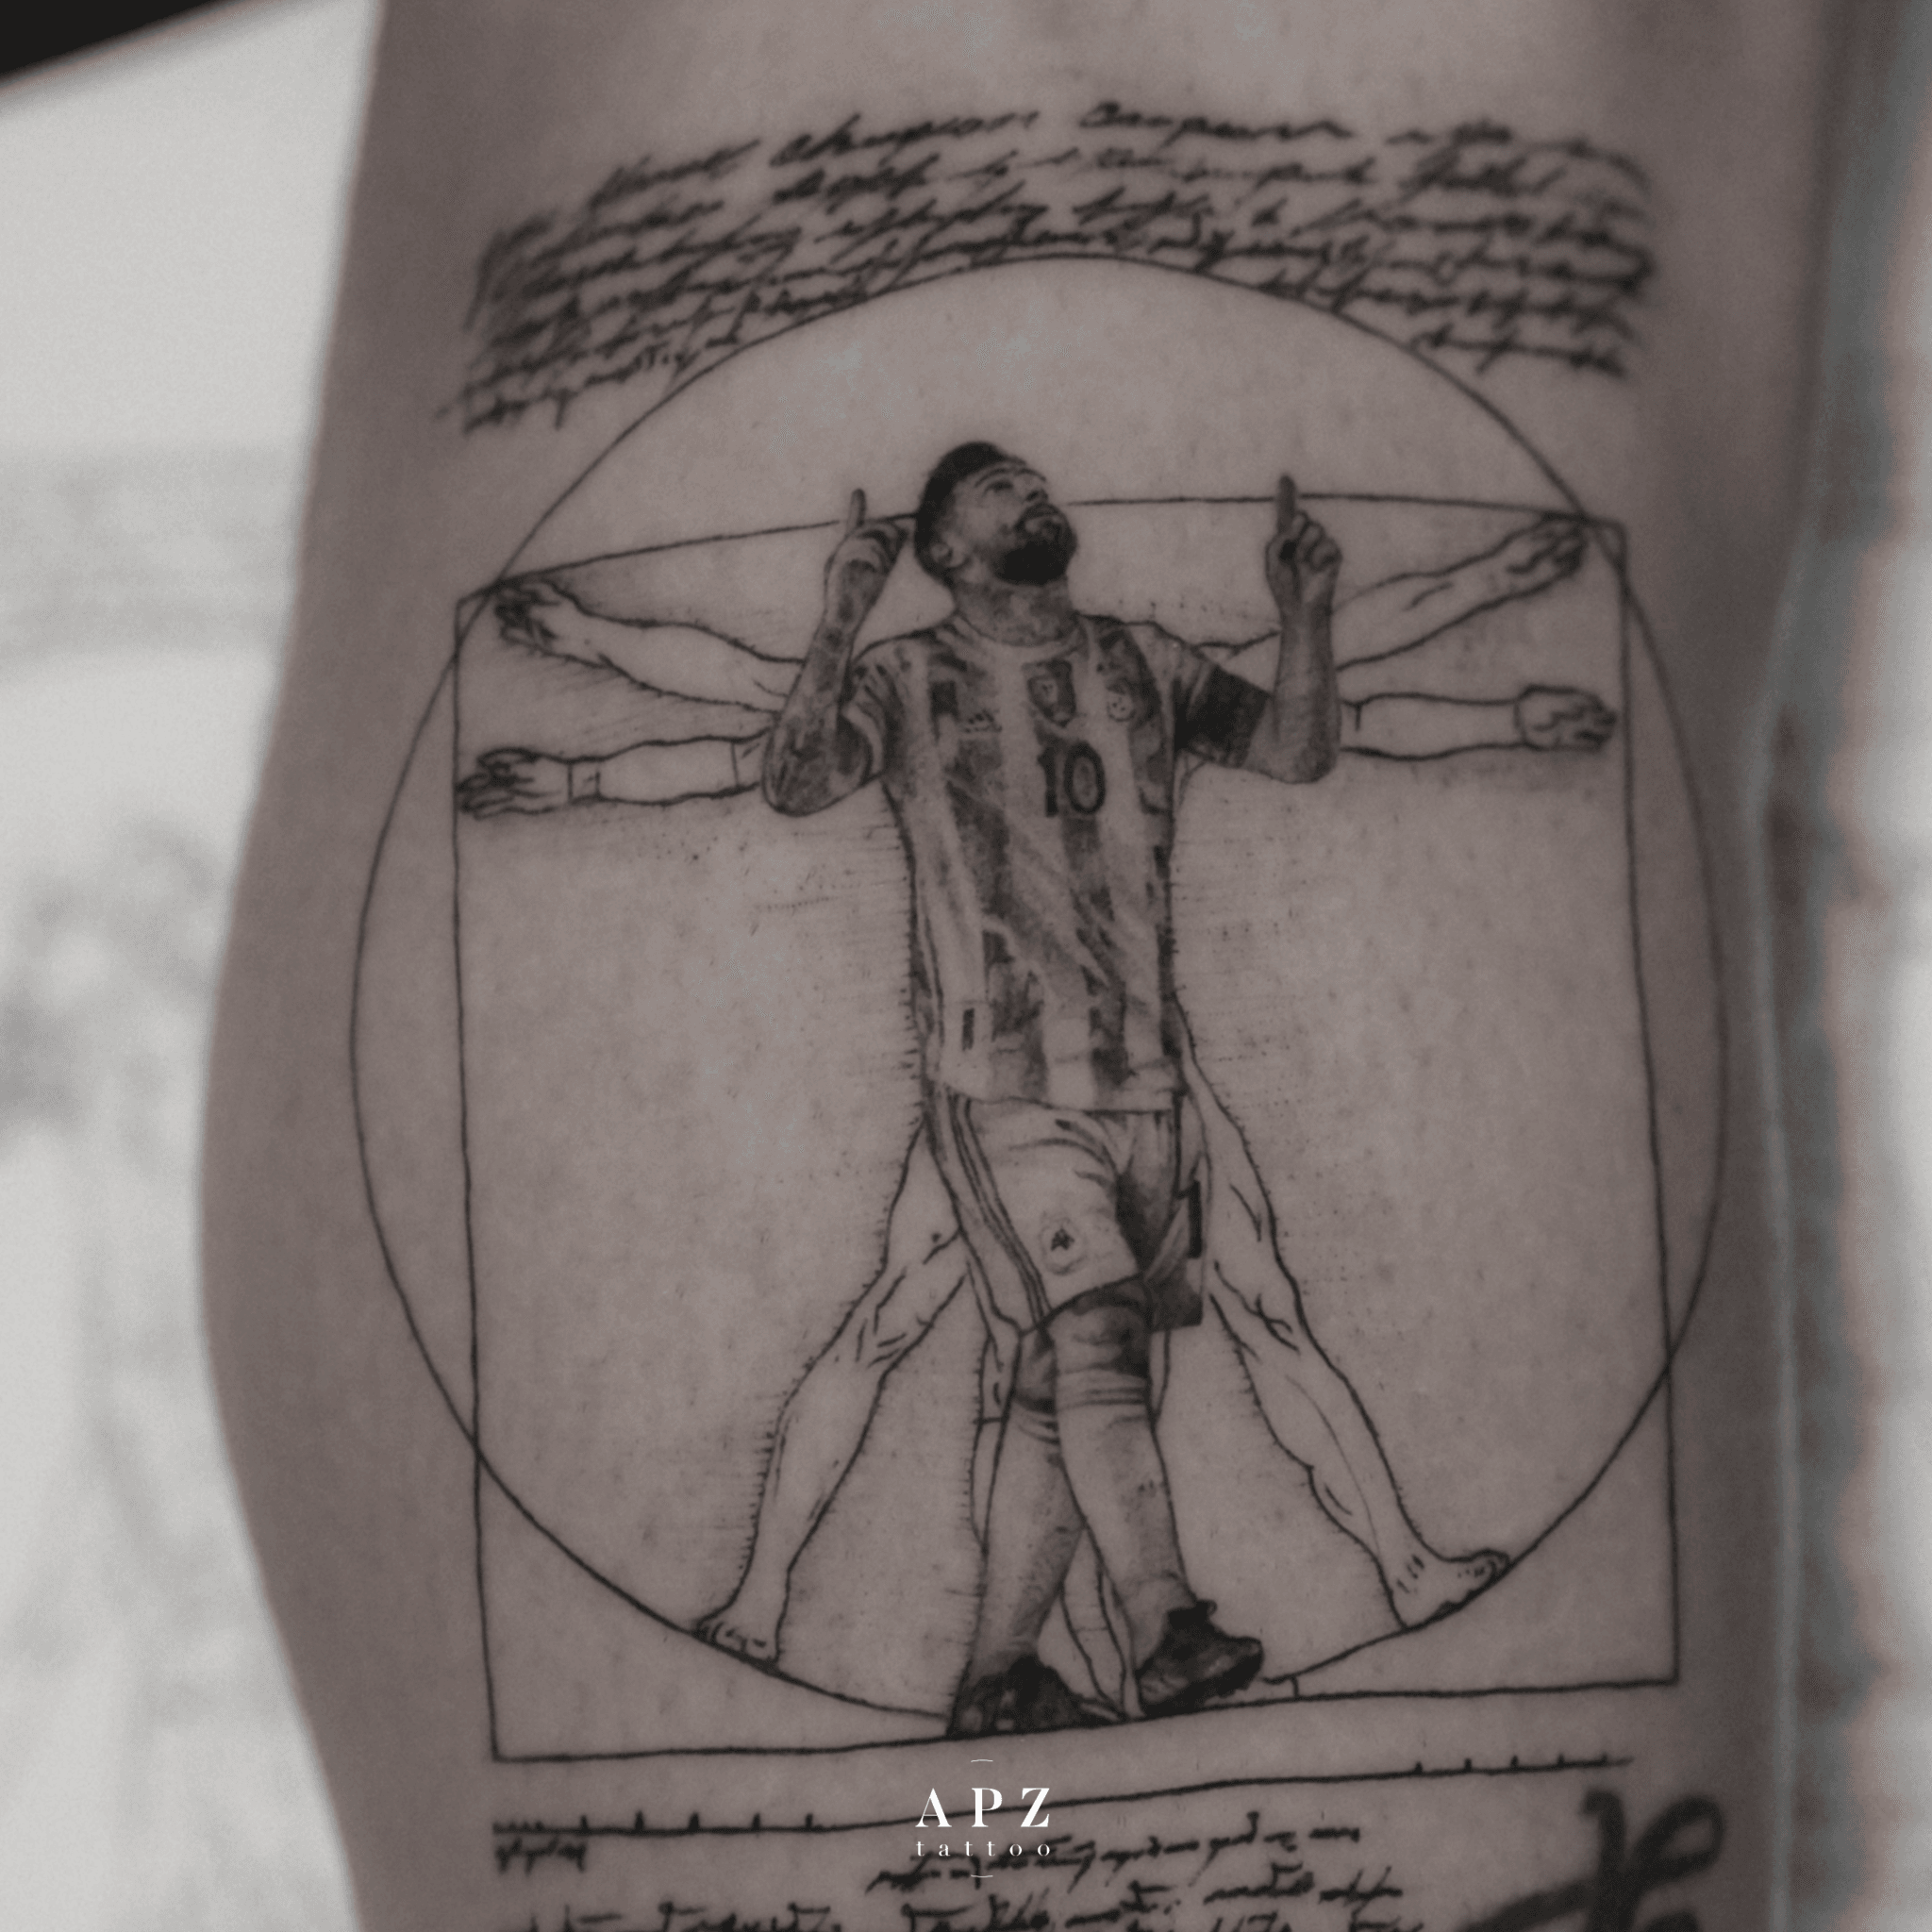 cr7 in Tattoos  Search in 13M Tattoos Now  Tattoodo